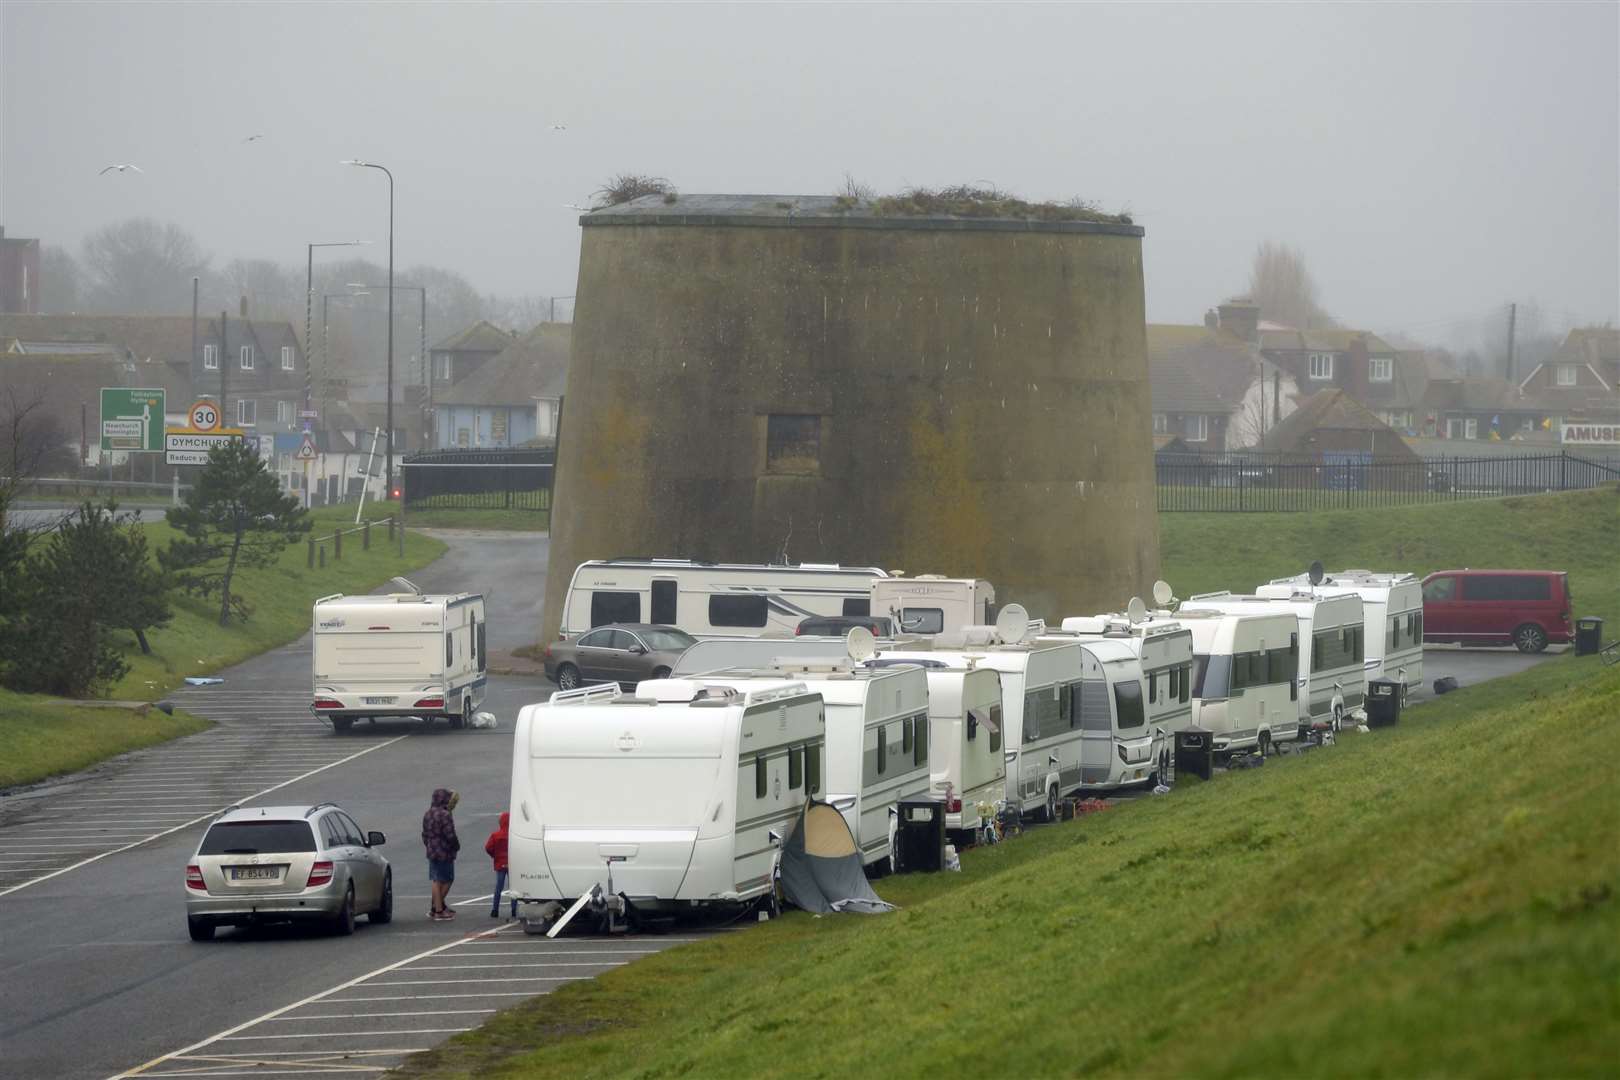 Caravans, all with foreign number plates, have parked in the lot, just off the A259. Picture: Barry Goodwin